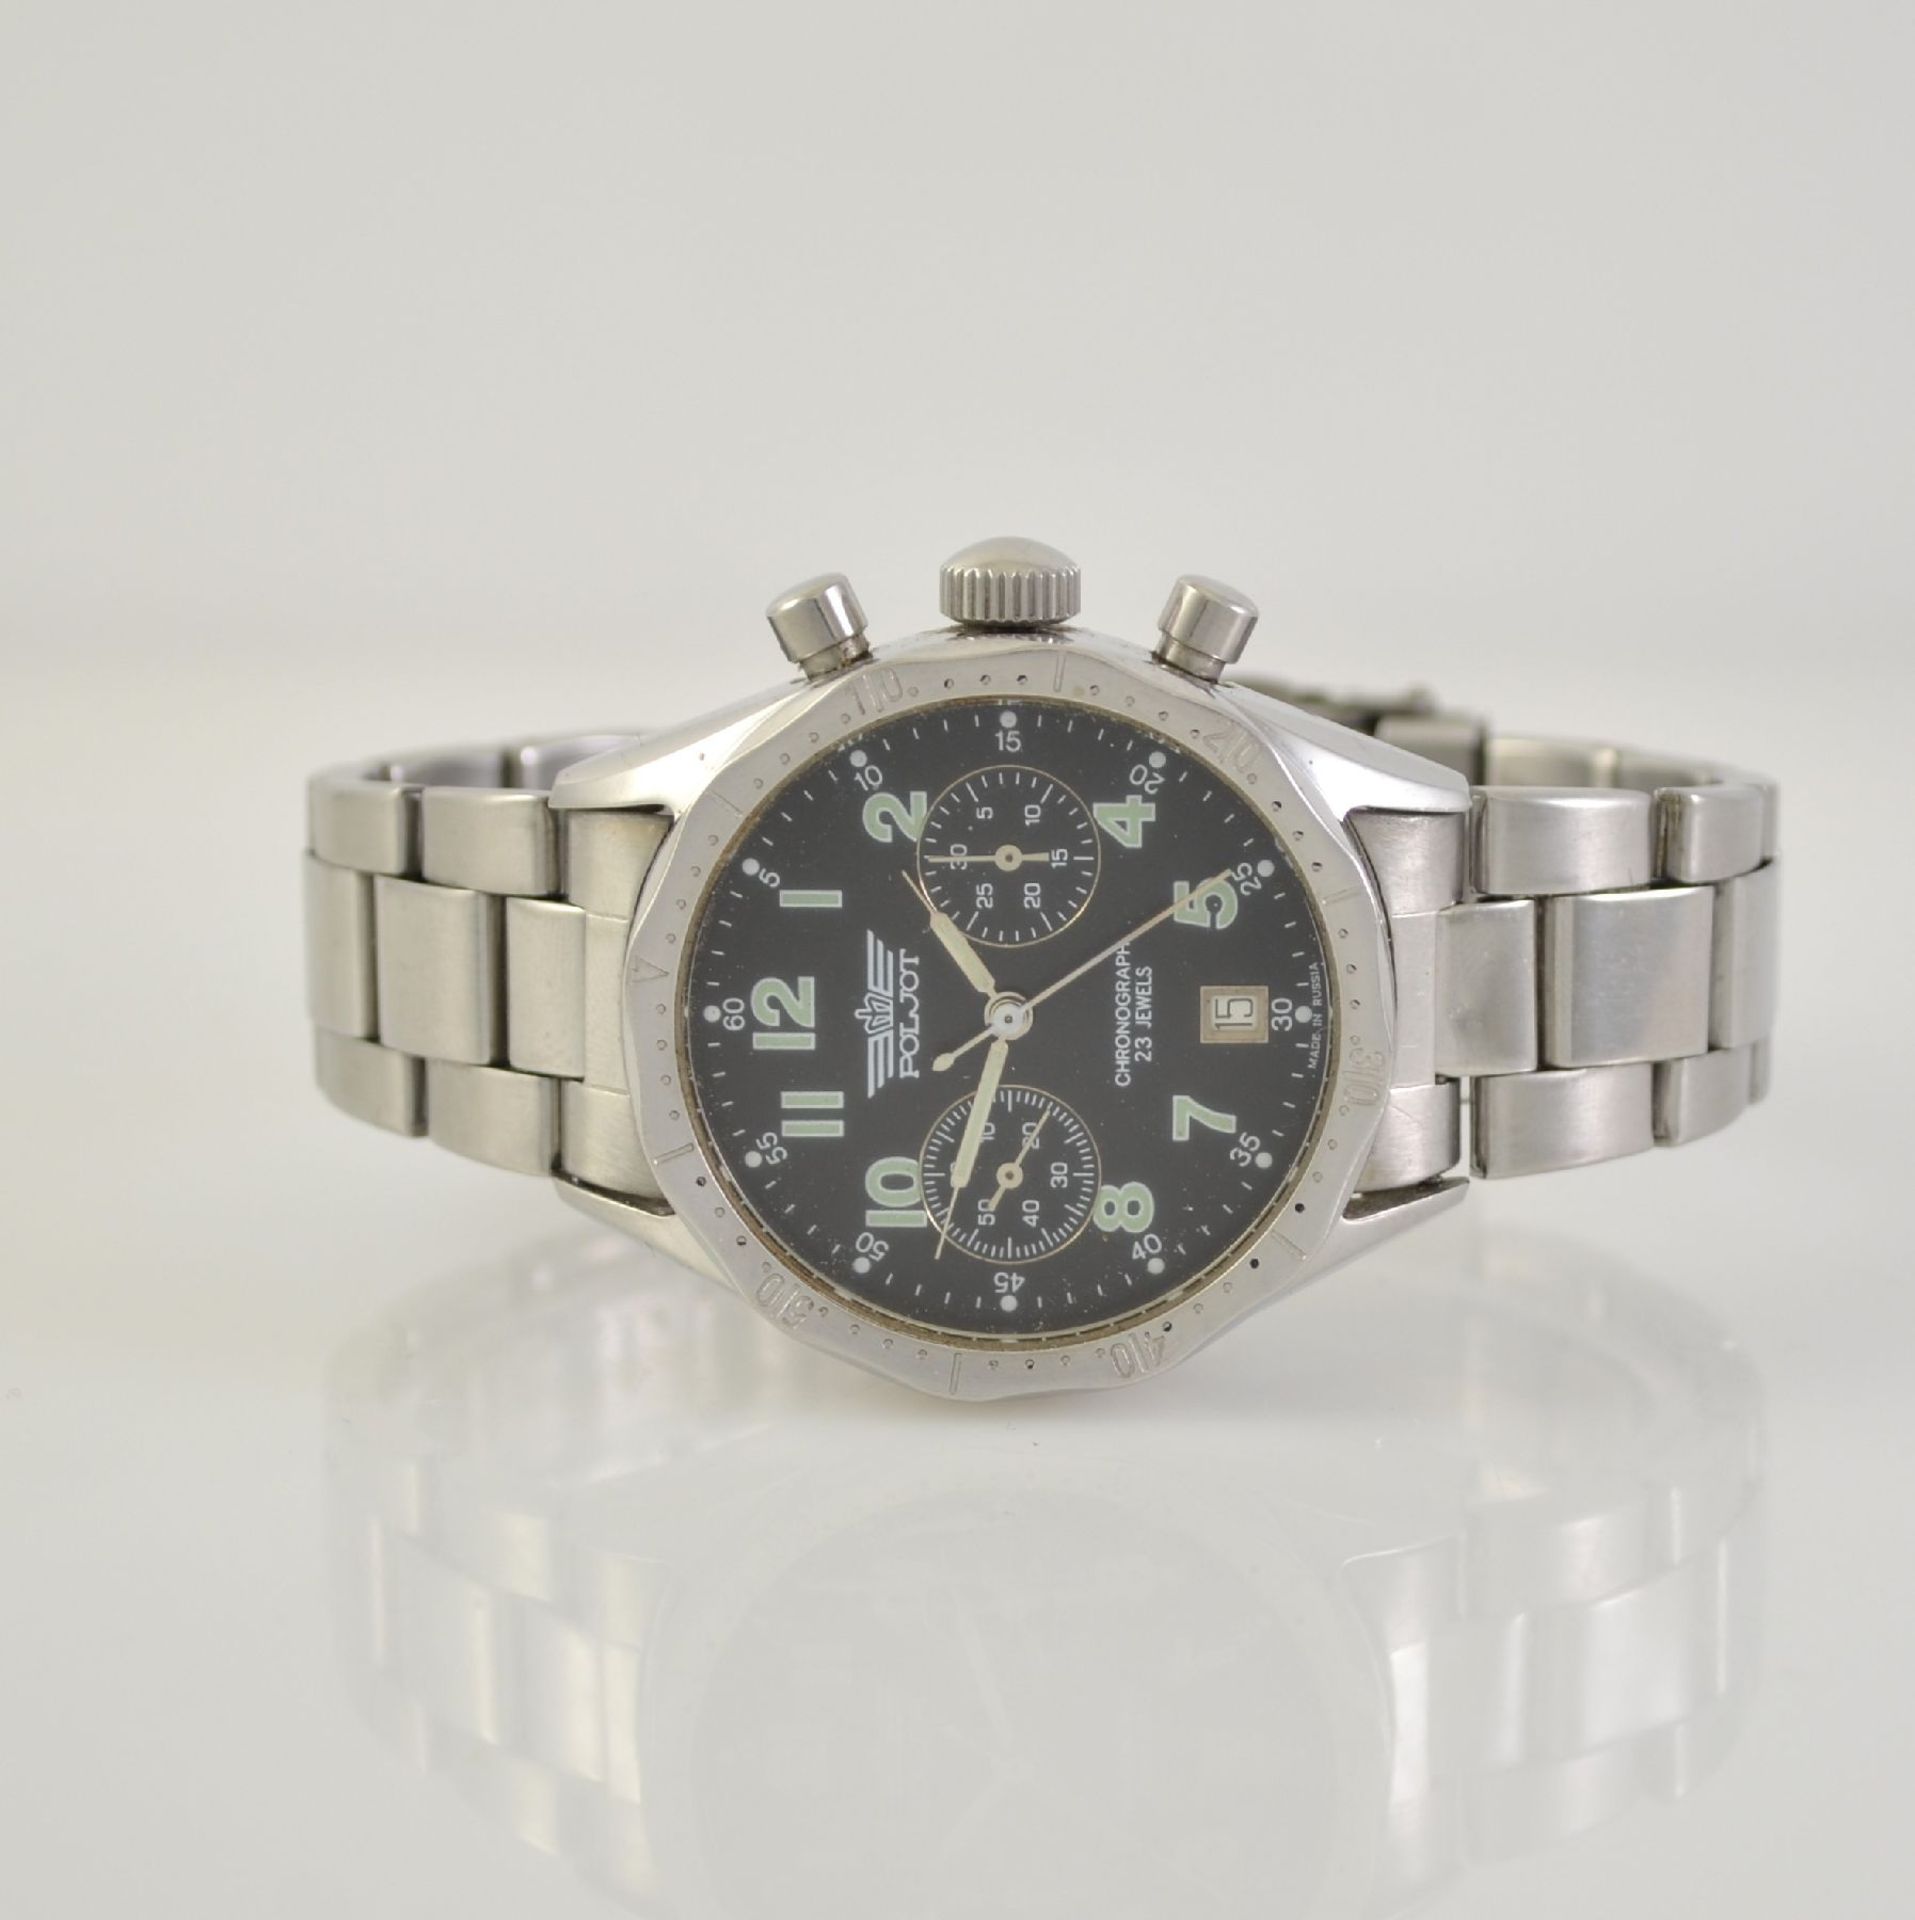 POLJOT chronograph, Russia around 1998, manual winding, stainless steel case including neutral